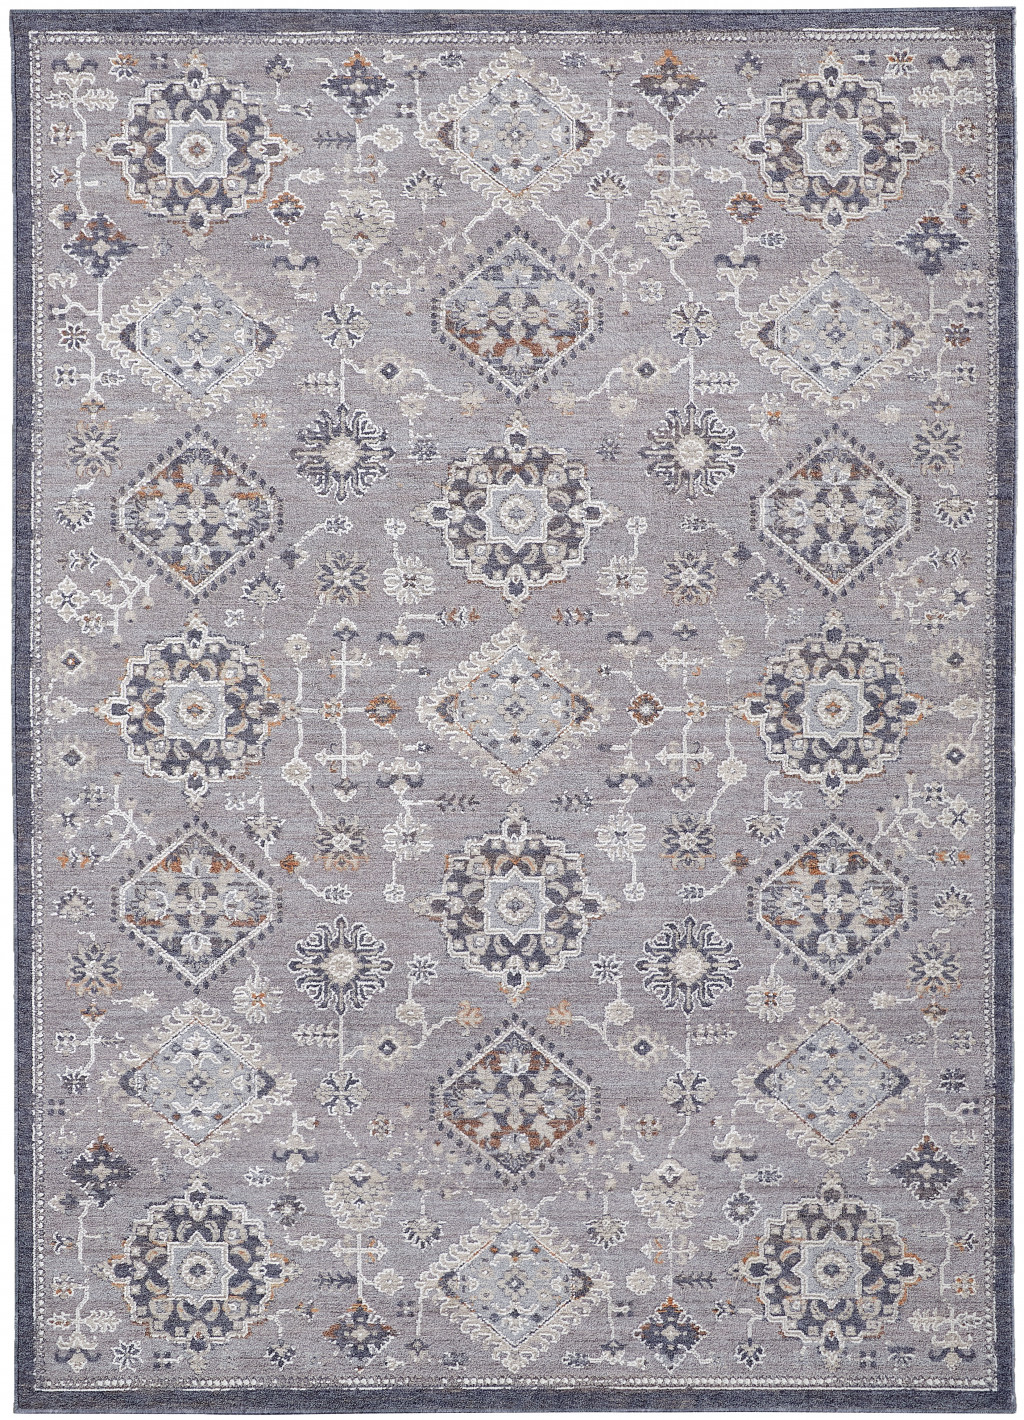 12' X 15' Gray Floral Power Loom Stain Resistant Area Rug-513713-1